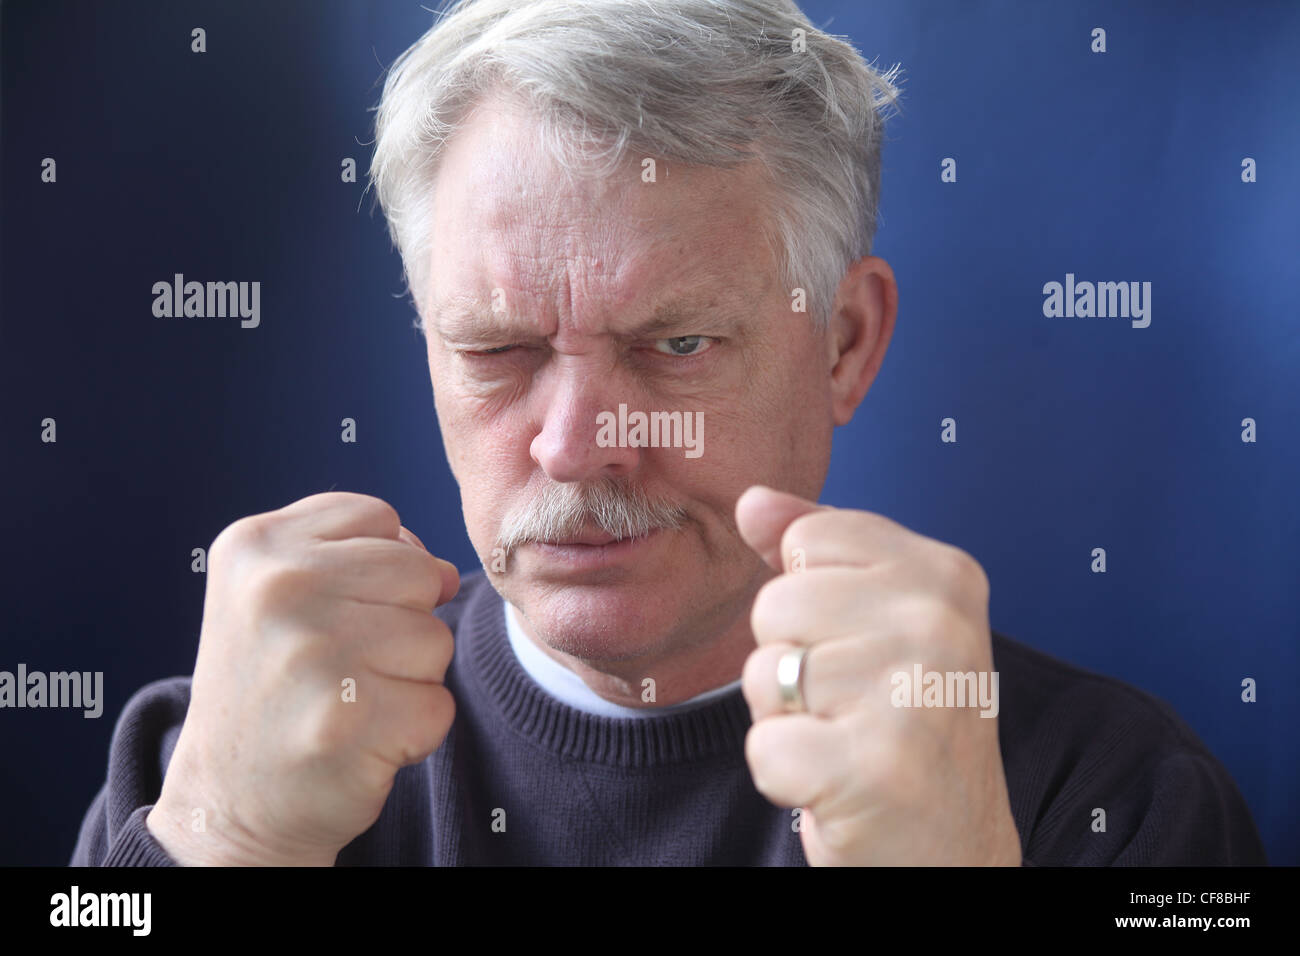 belligerent older man is angry and ready for a fight Stock Photo